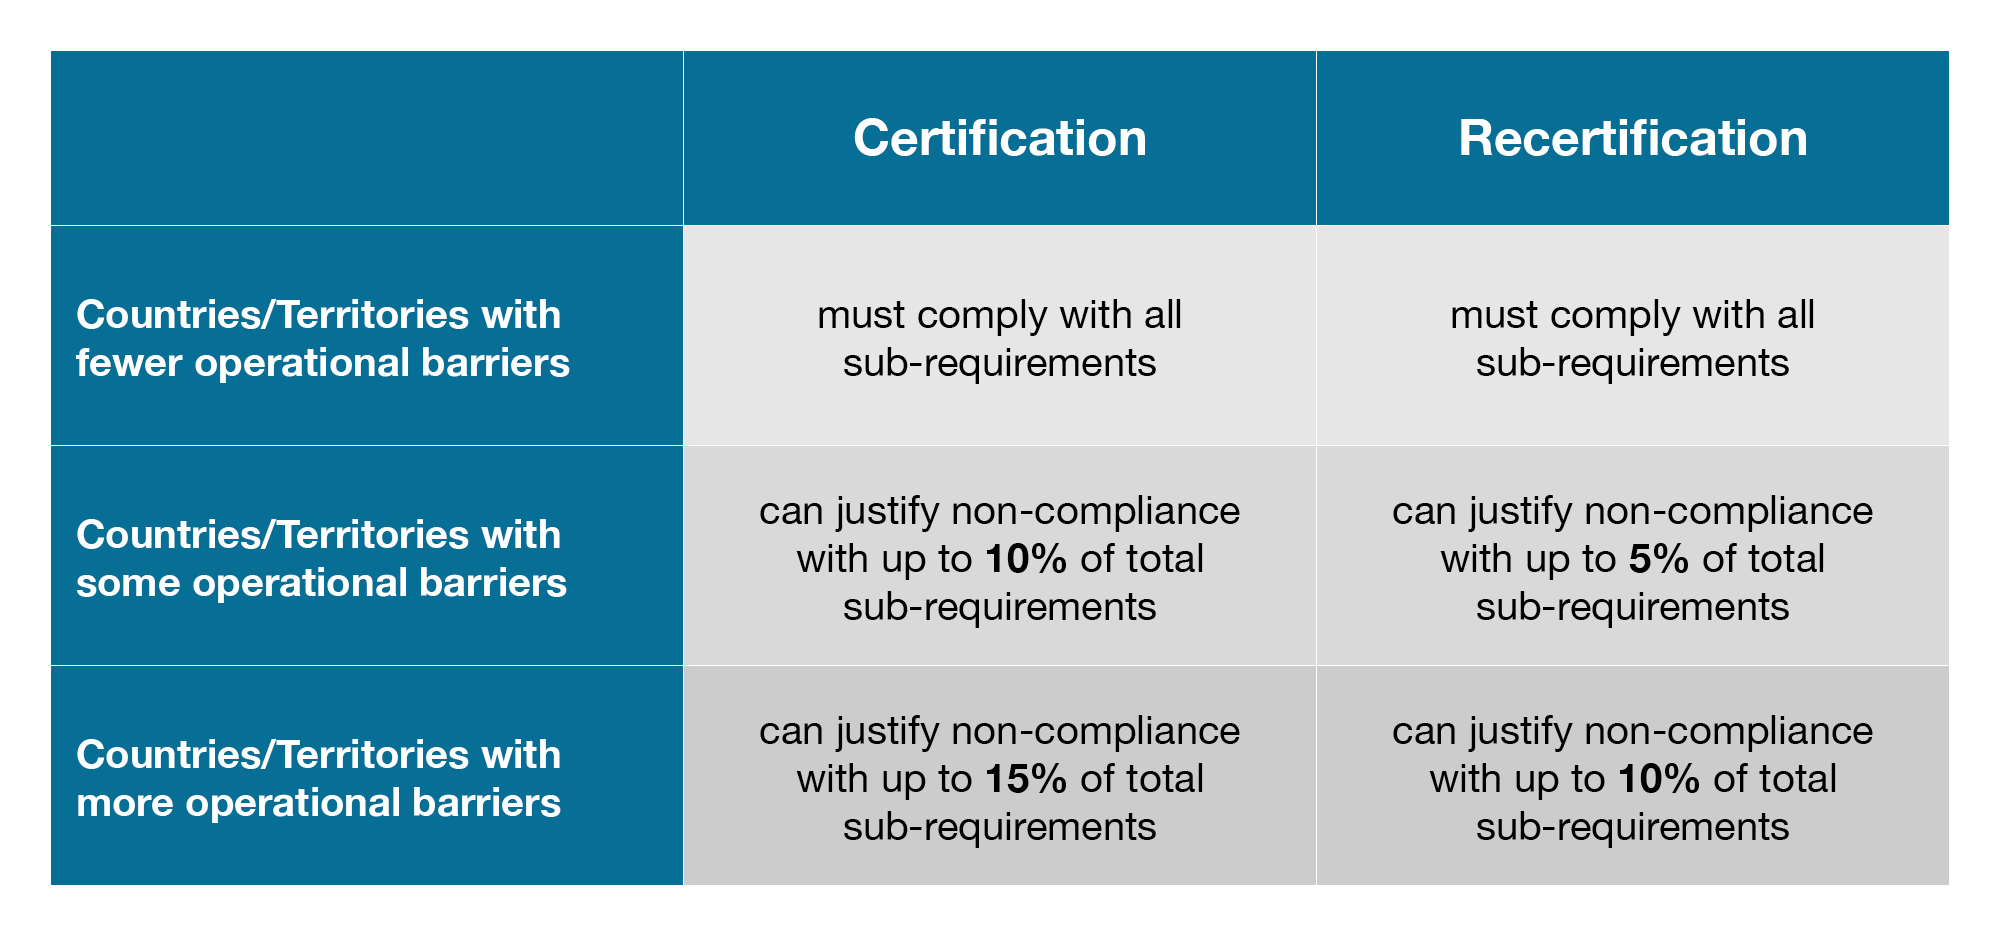 Countries/Territories with fewer operational barriers must comply with all sub-requirements on certification and recertification. Countries/Territories with some operational barriers can justify non-compliance with up to 10% of total sub-requirements on certification and 5% on recertification. Countries/Territories with more operational barriers can justify non-compliance with up to 15% of total sub-requirements on certification and 10% on recertification.